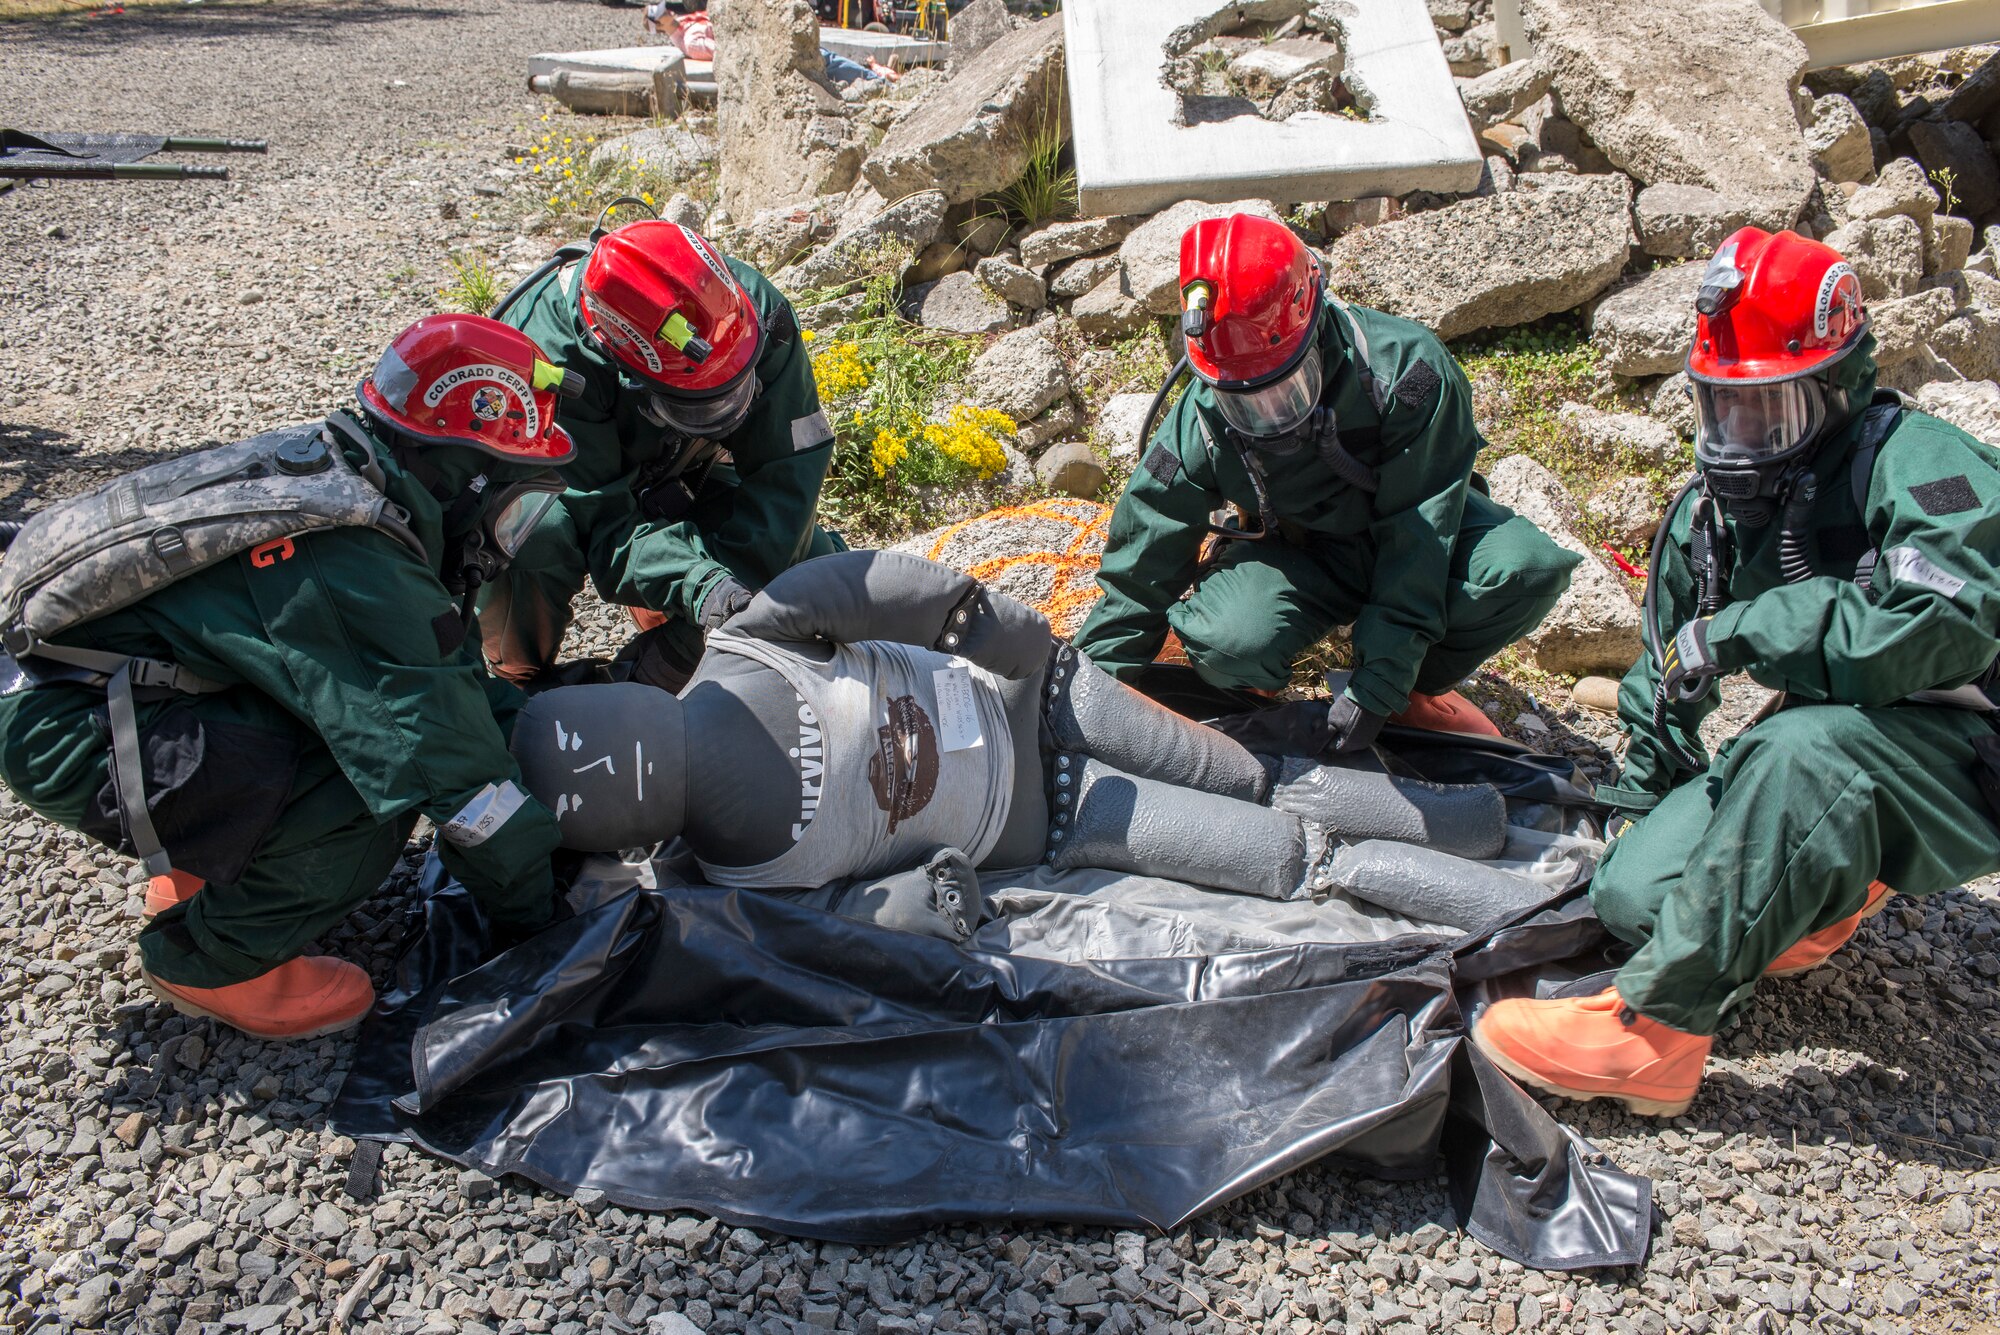 U.S. Colorado National Guard Airmen, assigned to the 140th Fatality Search and Reascue Team (FSRT), load the deceased, at Camp Rilea, Warrenton, Oregon, on Aug. 4, 2016. The FSRT is part of the Chemical, Biological, Radiological and Nuclear (CBRN) Enhanced Response Force Package (CERF-P) and functions as a recovery team, helping families find closure after properly identfying those who have lost their lives. (U.S. Colorado Air National Guard photo by Staff Sgt. Bobbie Reynolds) 